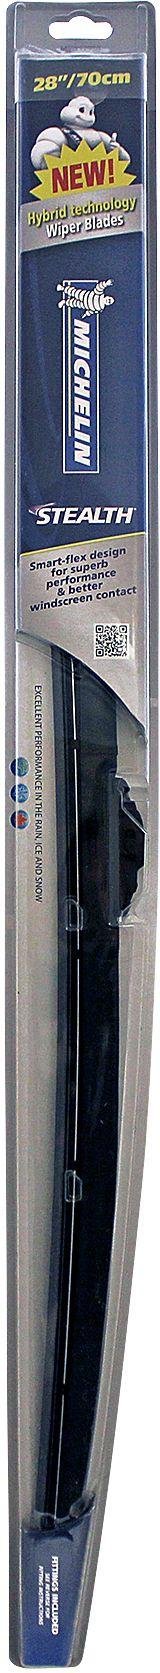 Michelin Stealth Hybrid Wiper Blade - 28 Inch. Review